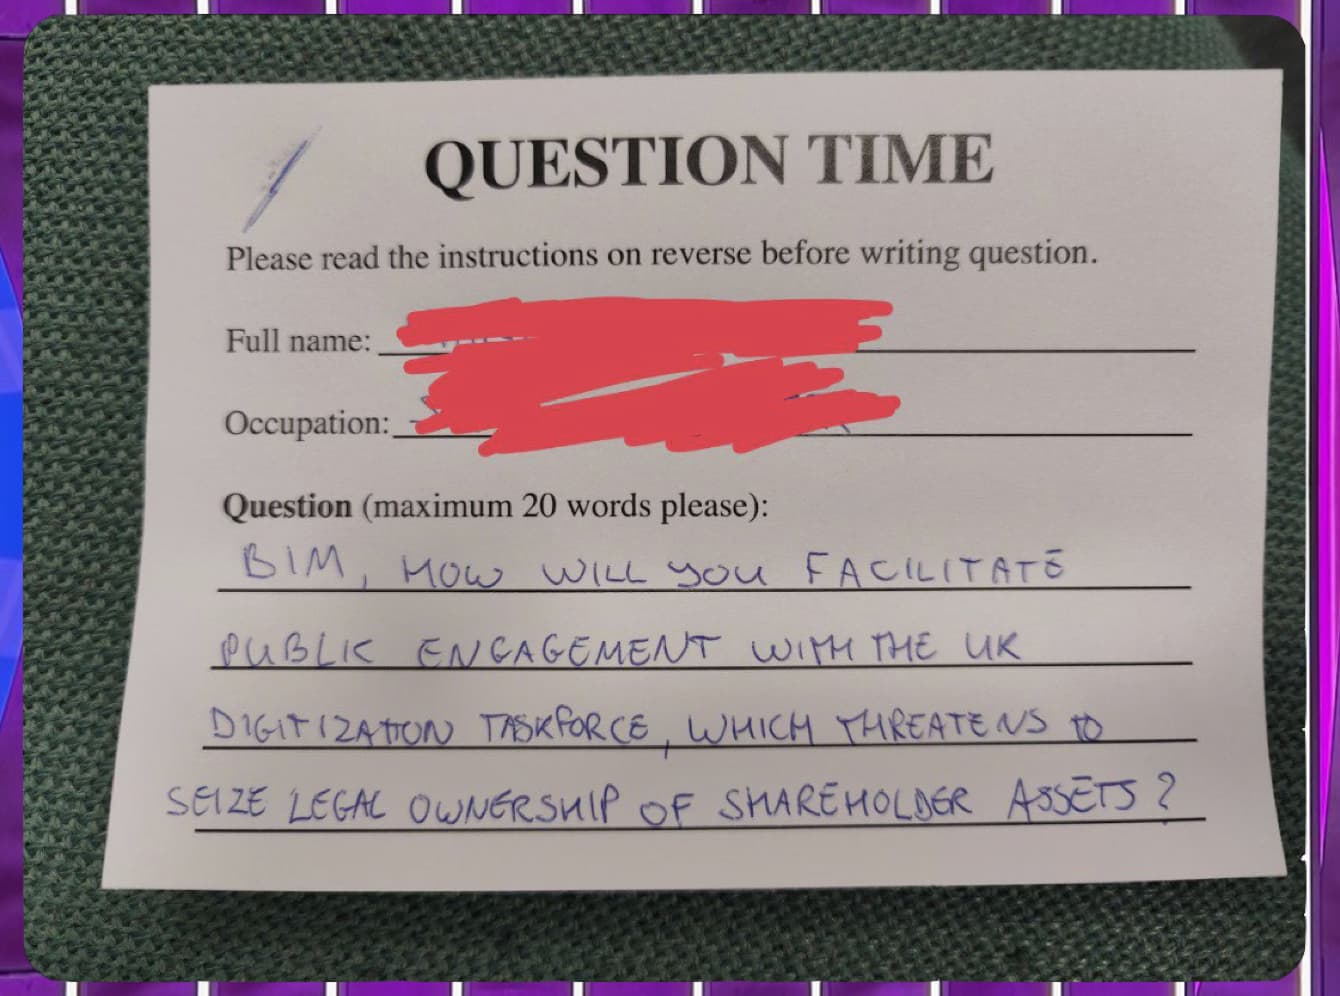 IMAGE OF THE QUESTION TIME QUESTION.